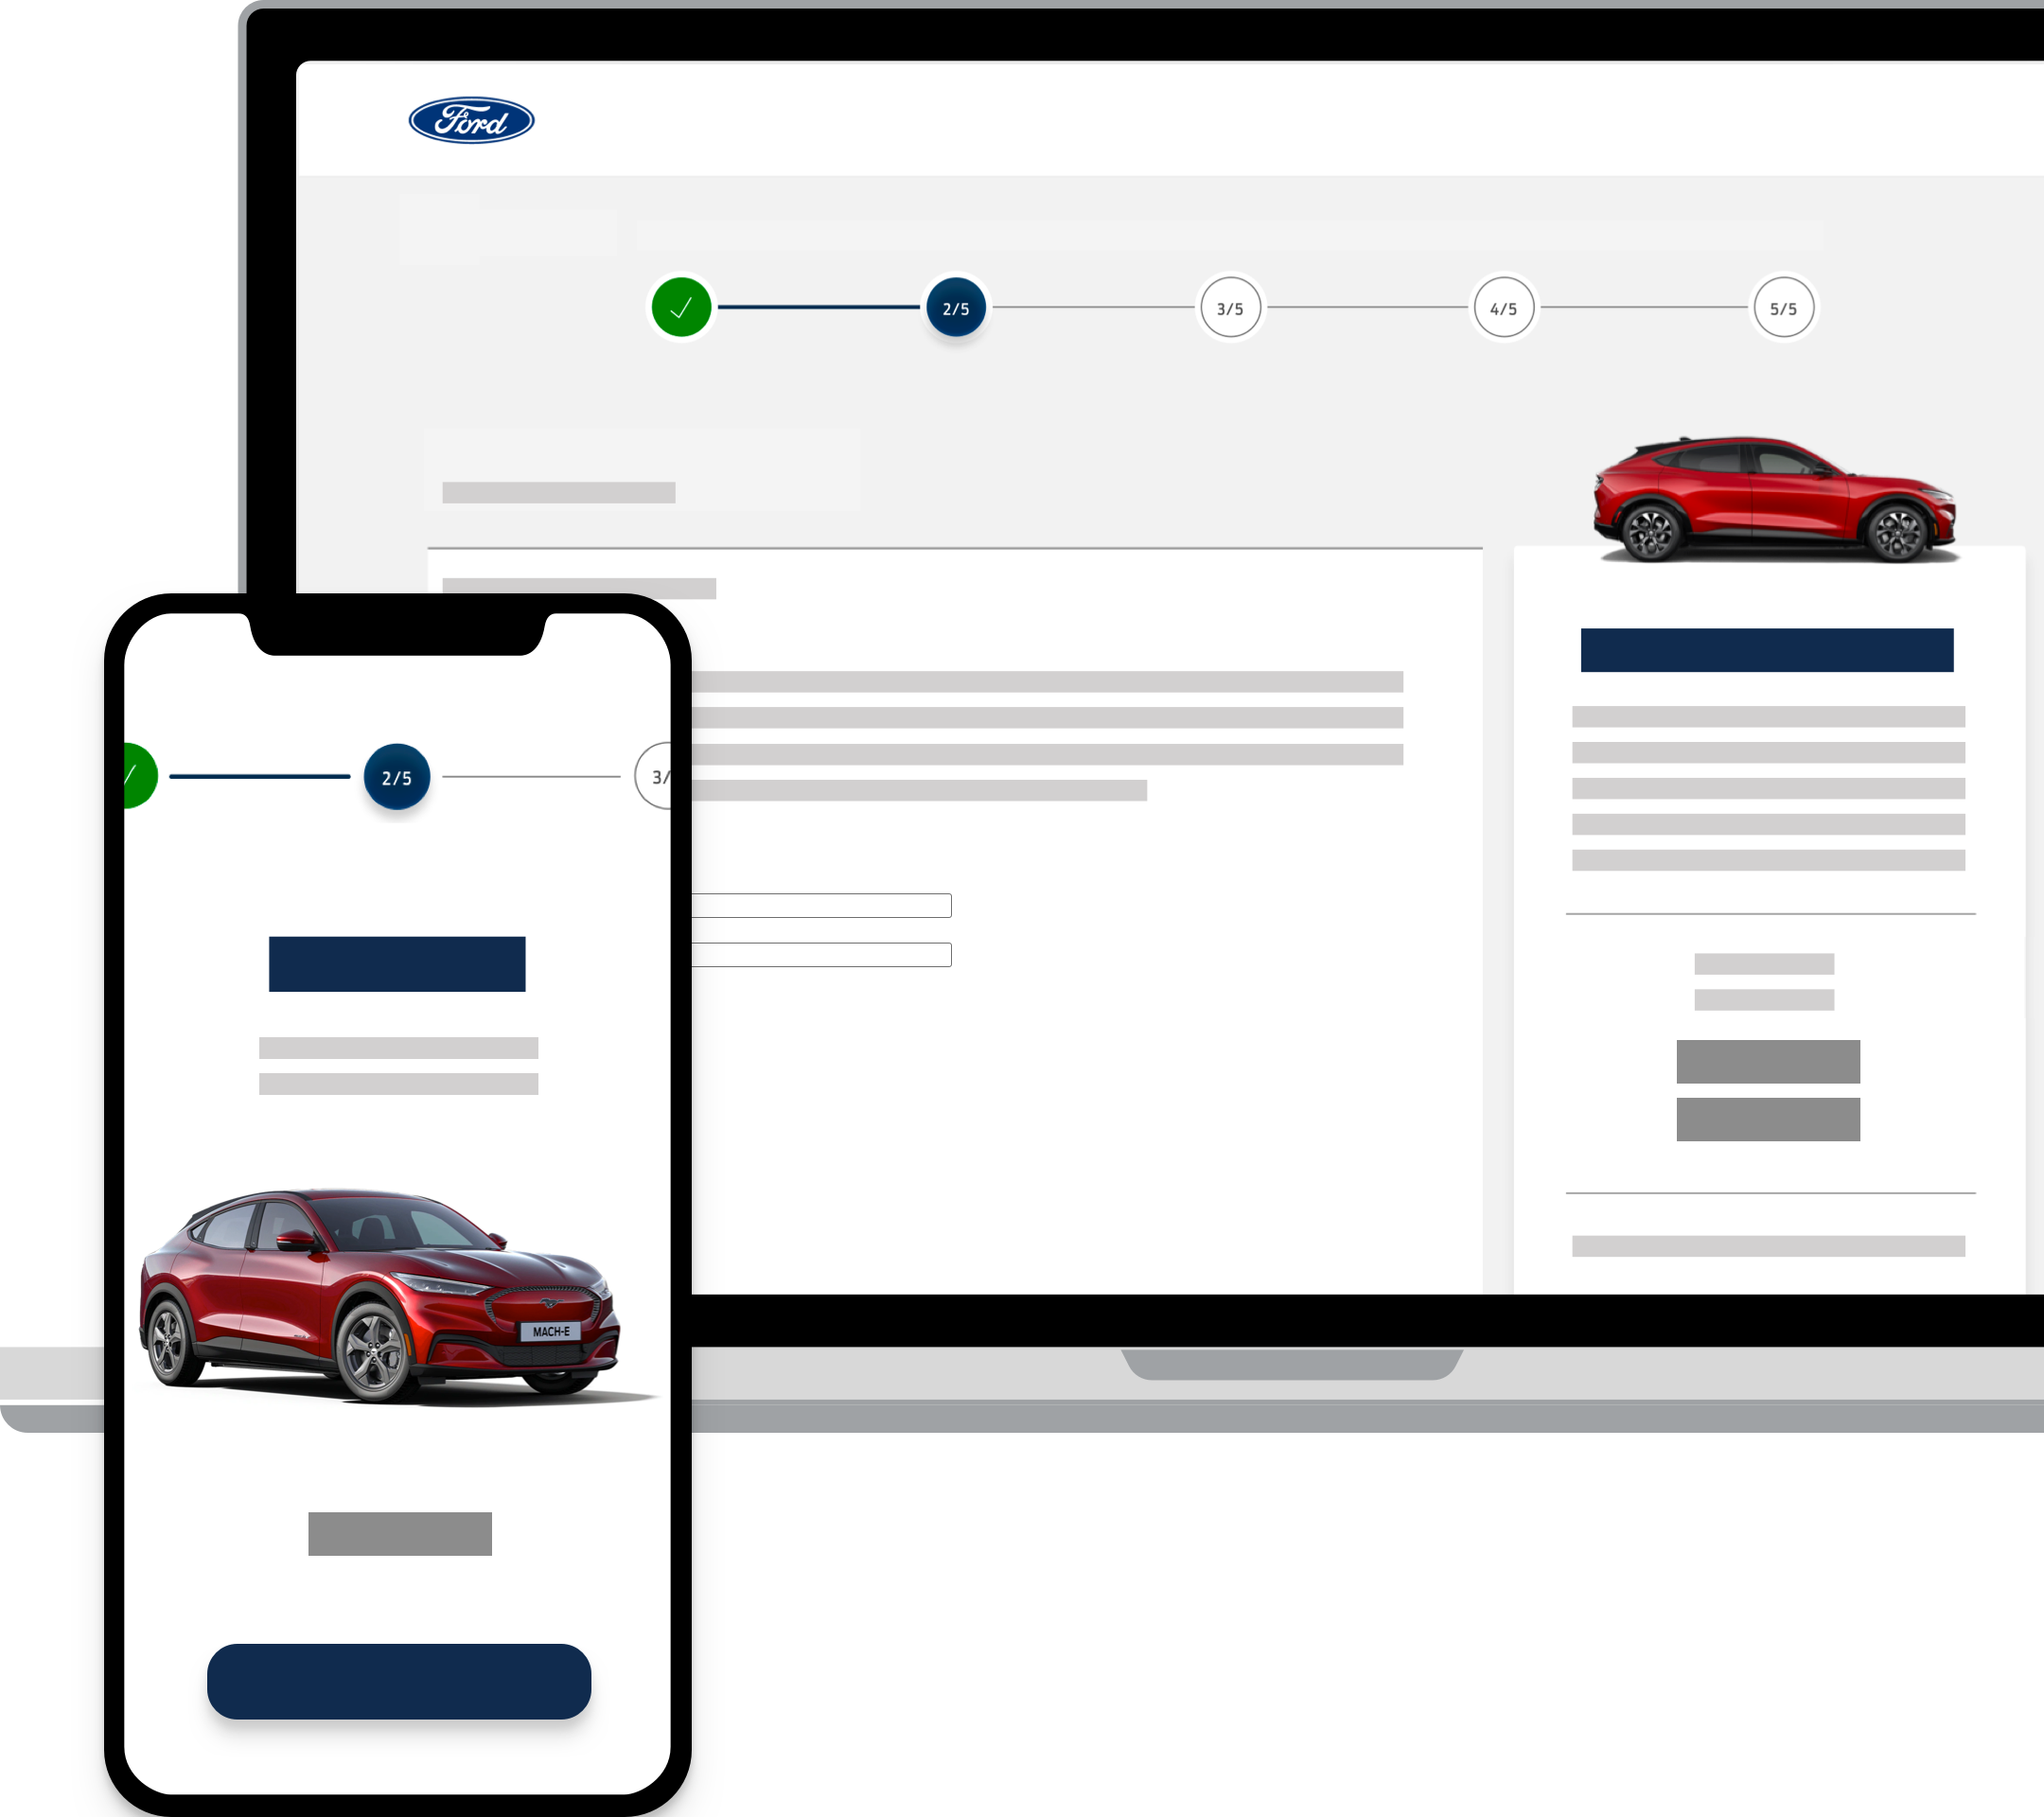 Ford online purchase summary